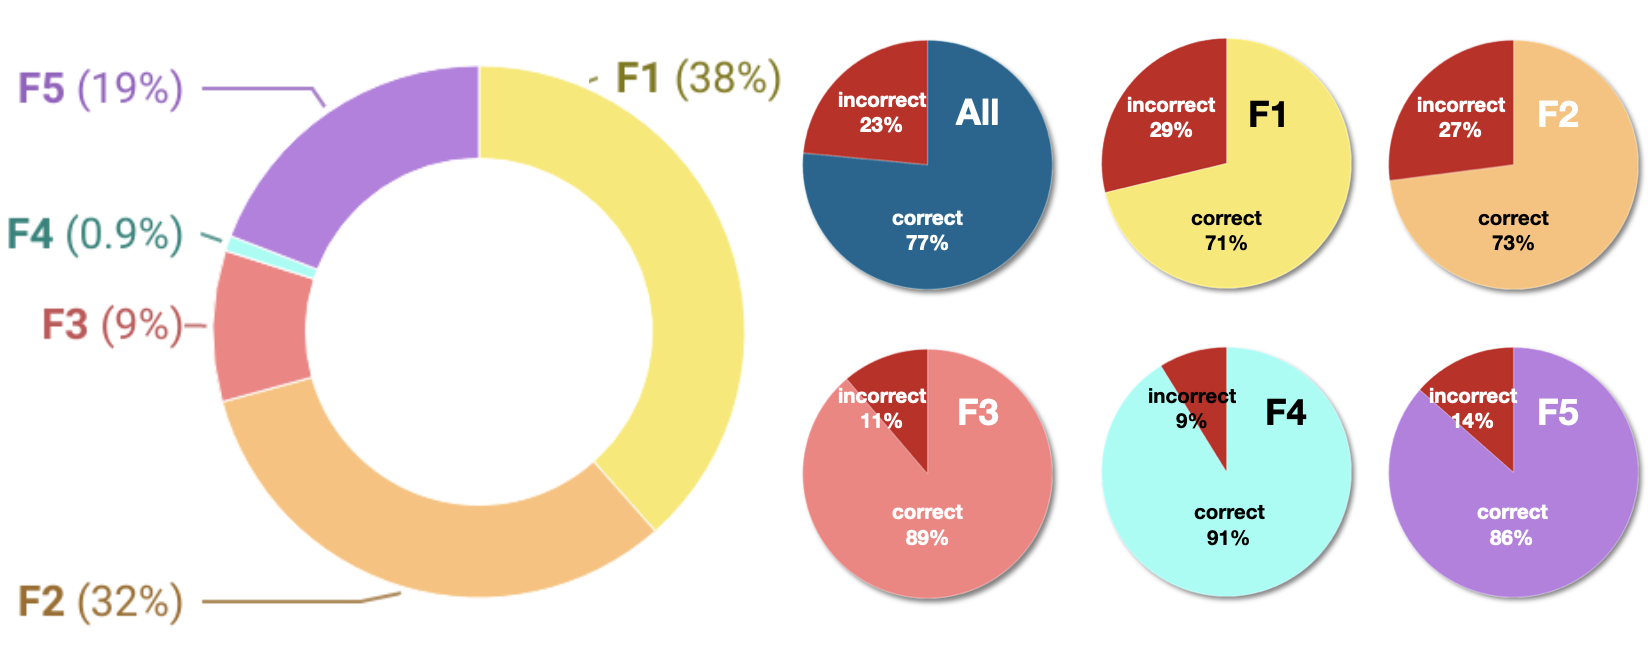 The distribution of formats is 38\%, 32\% 9\%, 0.9\%, and 19\% from F1~F5. The correct percentage is 77\%.